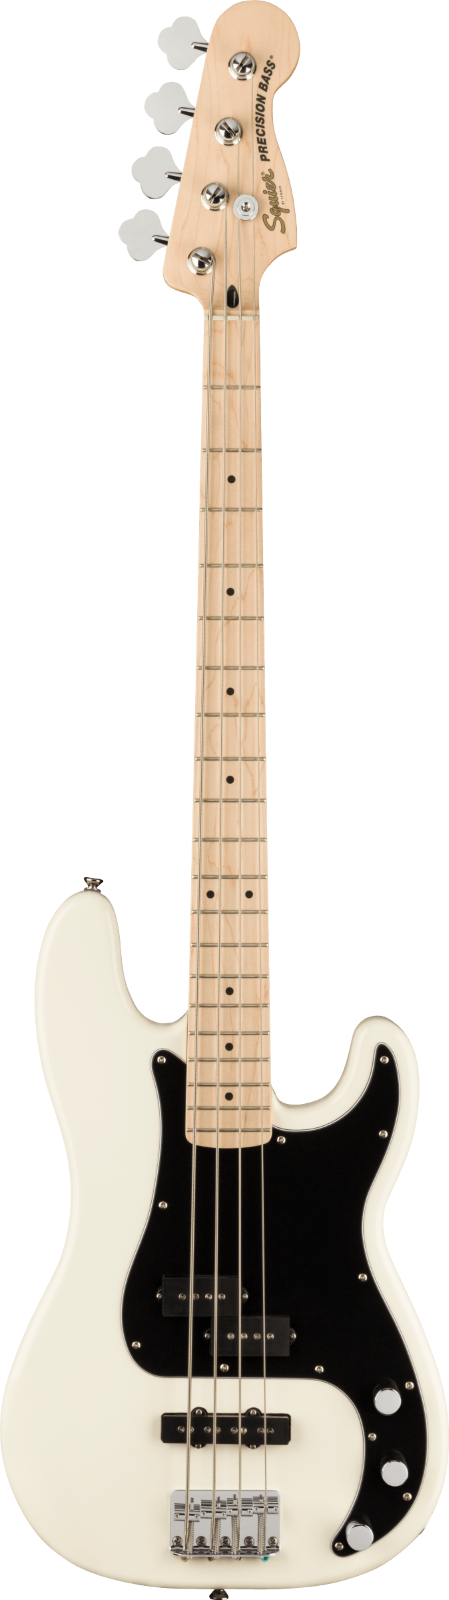 Squier Affinity Series Precision Bass PJ, Maple Fingerboard, Black Pickguard, Olympic White : photo 1